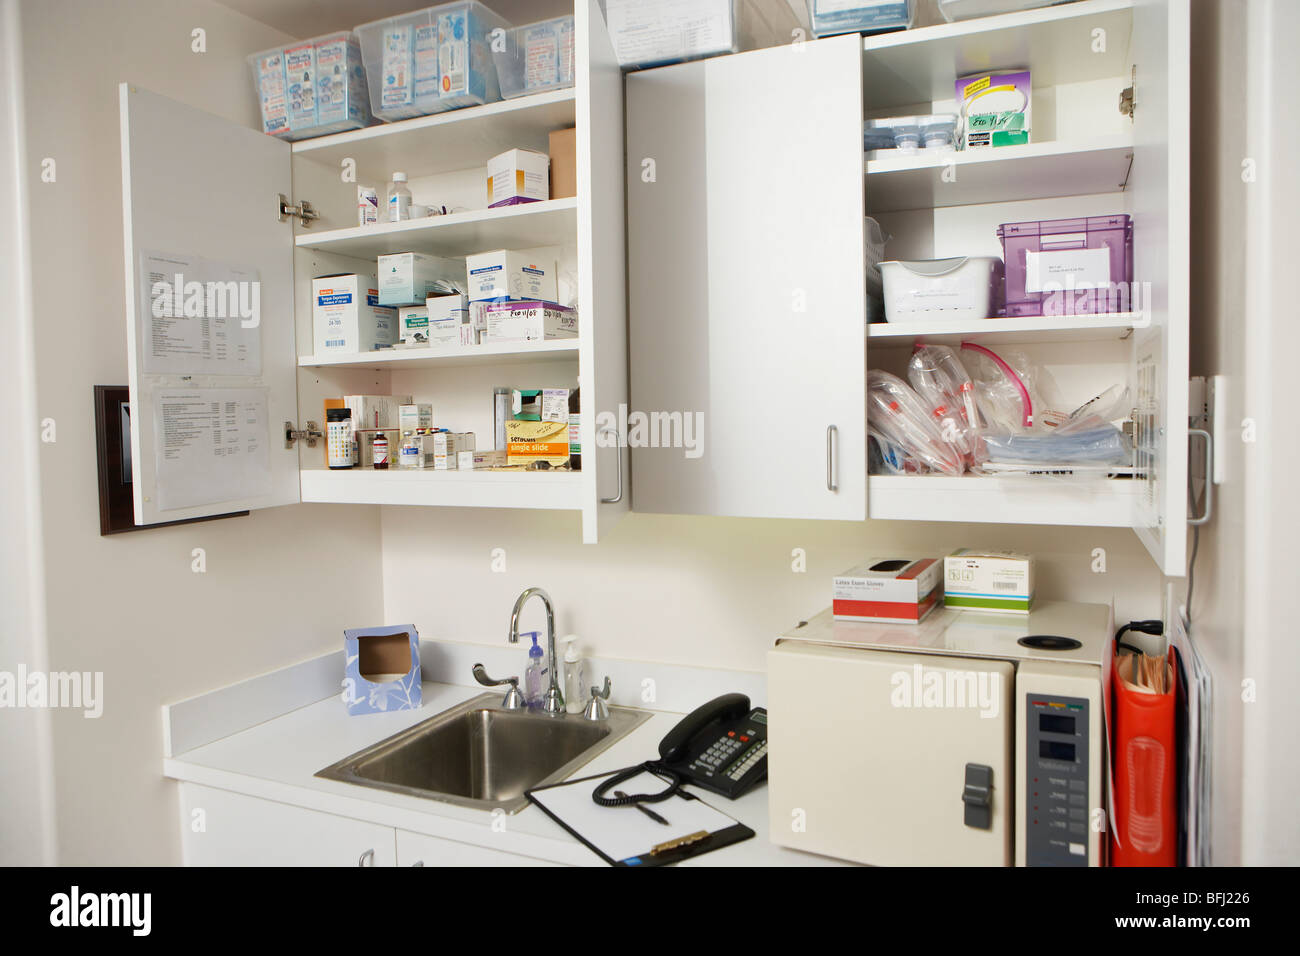 Medical Cabinets In Hospital Stock Photo 26826974 Alamy